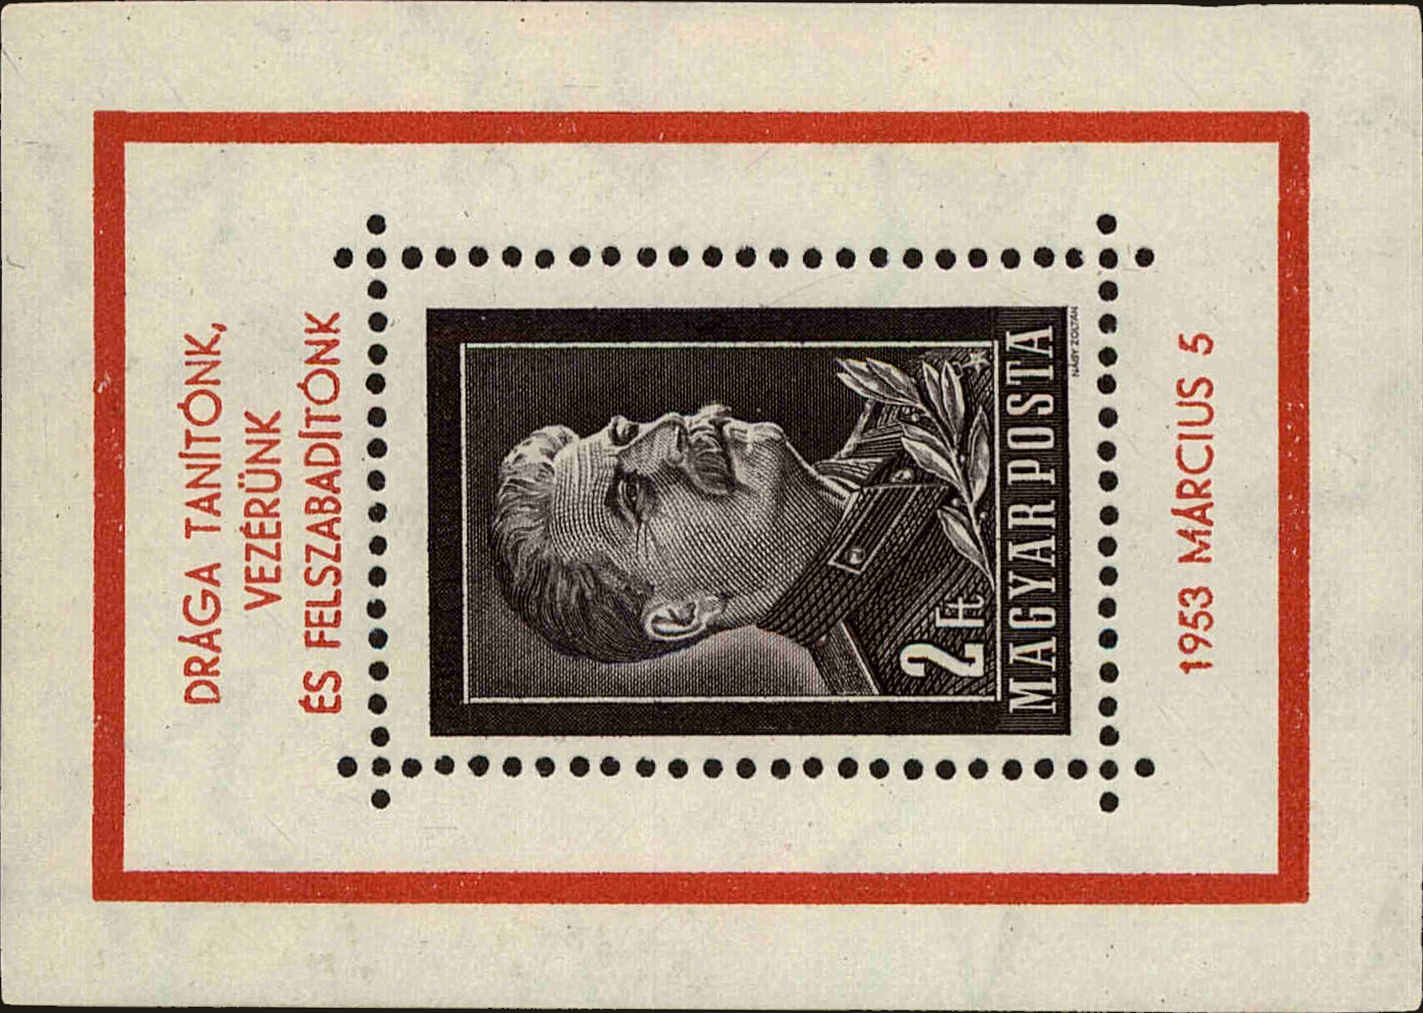 Front view of Hungary 1035 collectors stamp